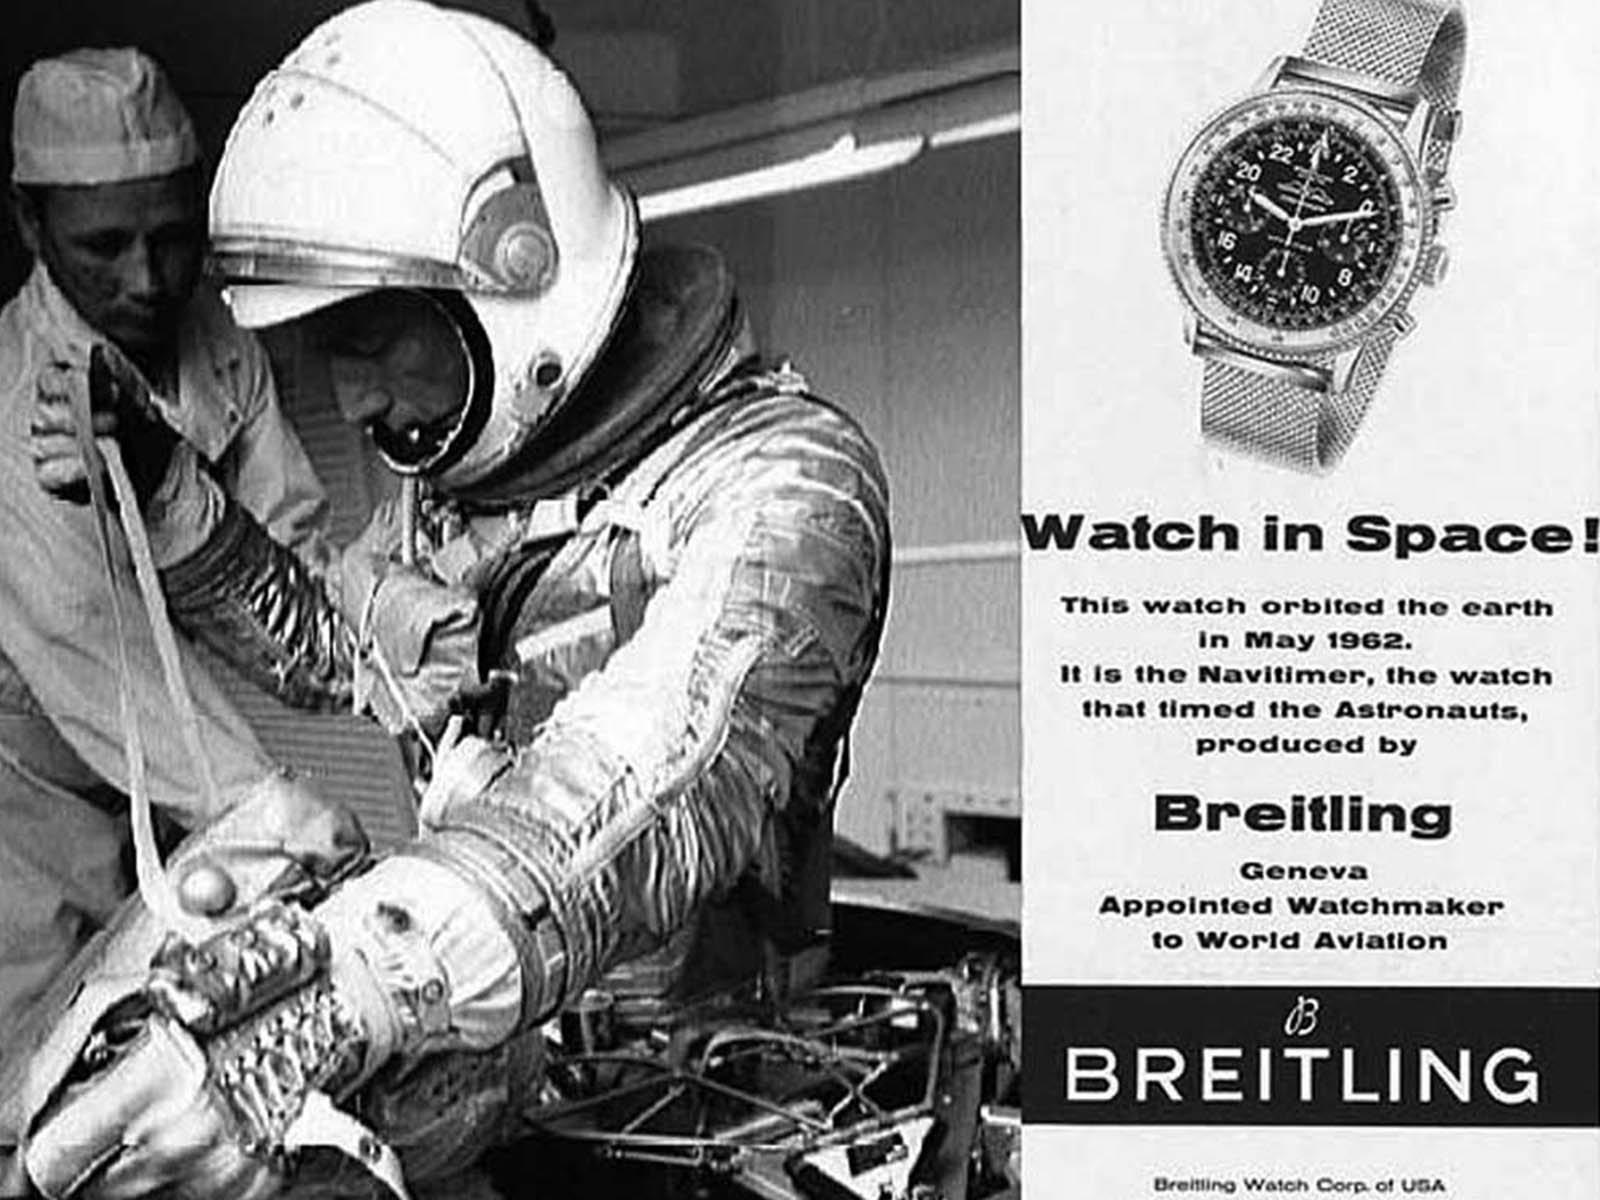 Space watch